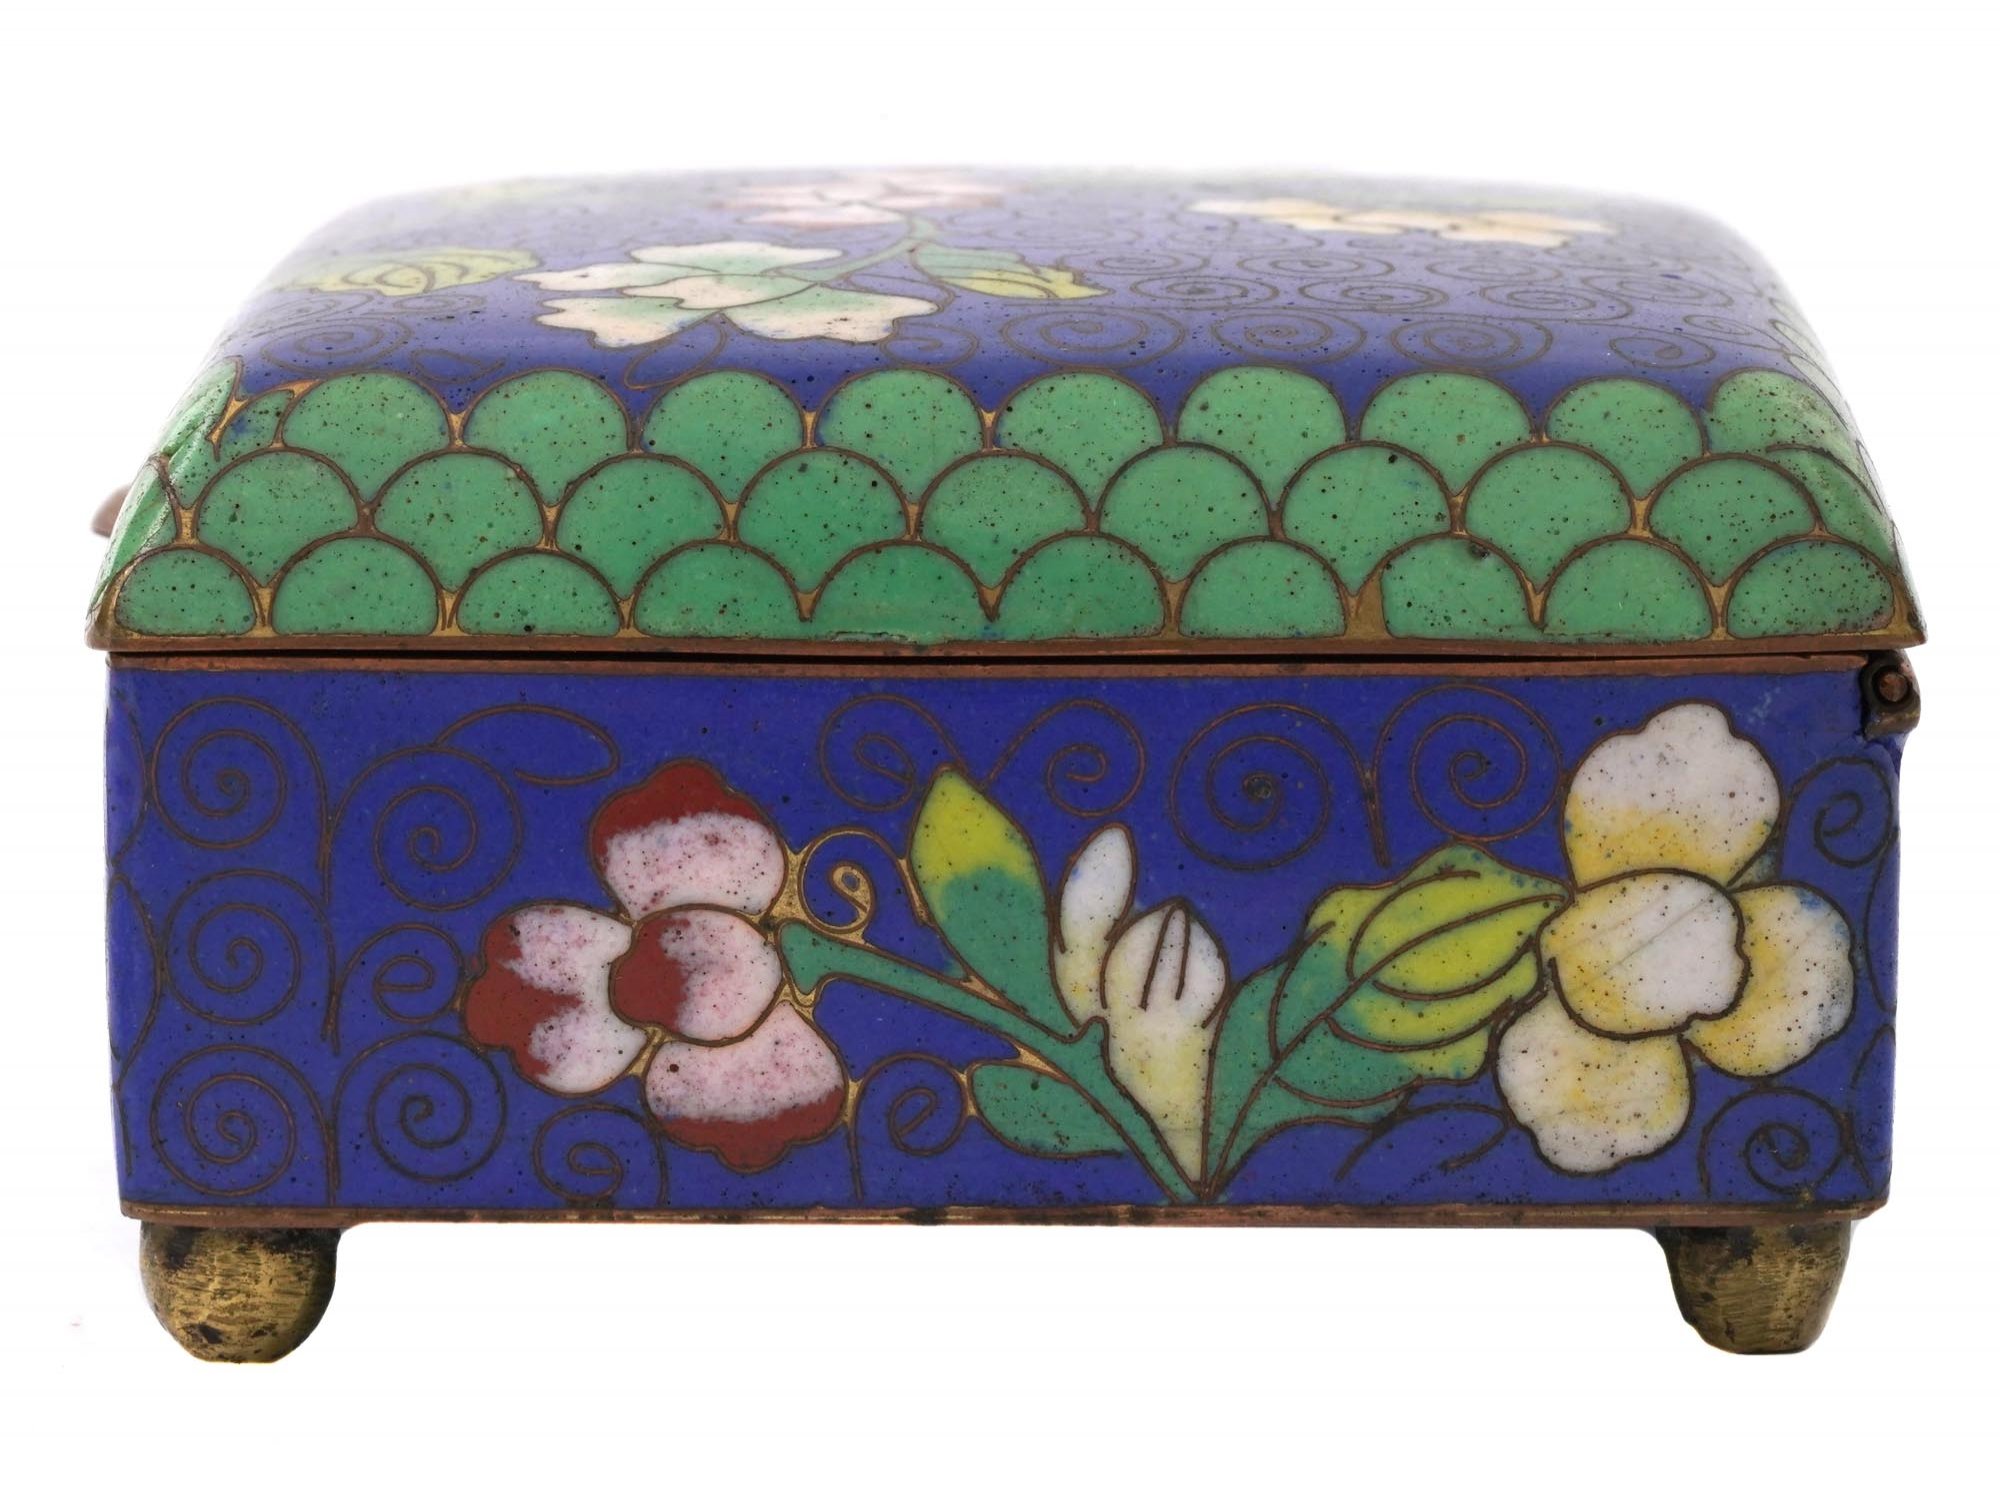 ANTIQUE CHINESE COVERED FLORAL CLOISONNE ENAMEL BOX PIC-5